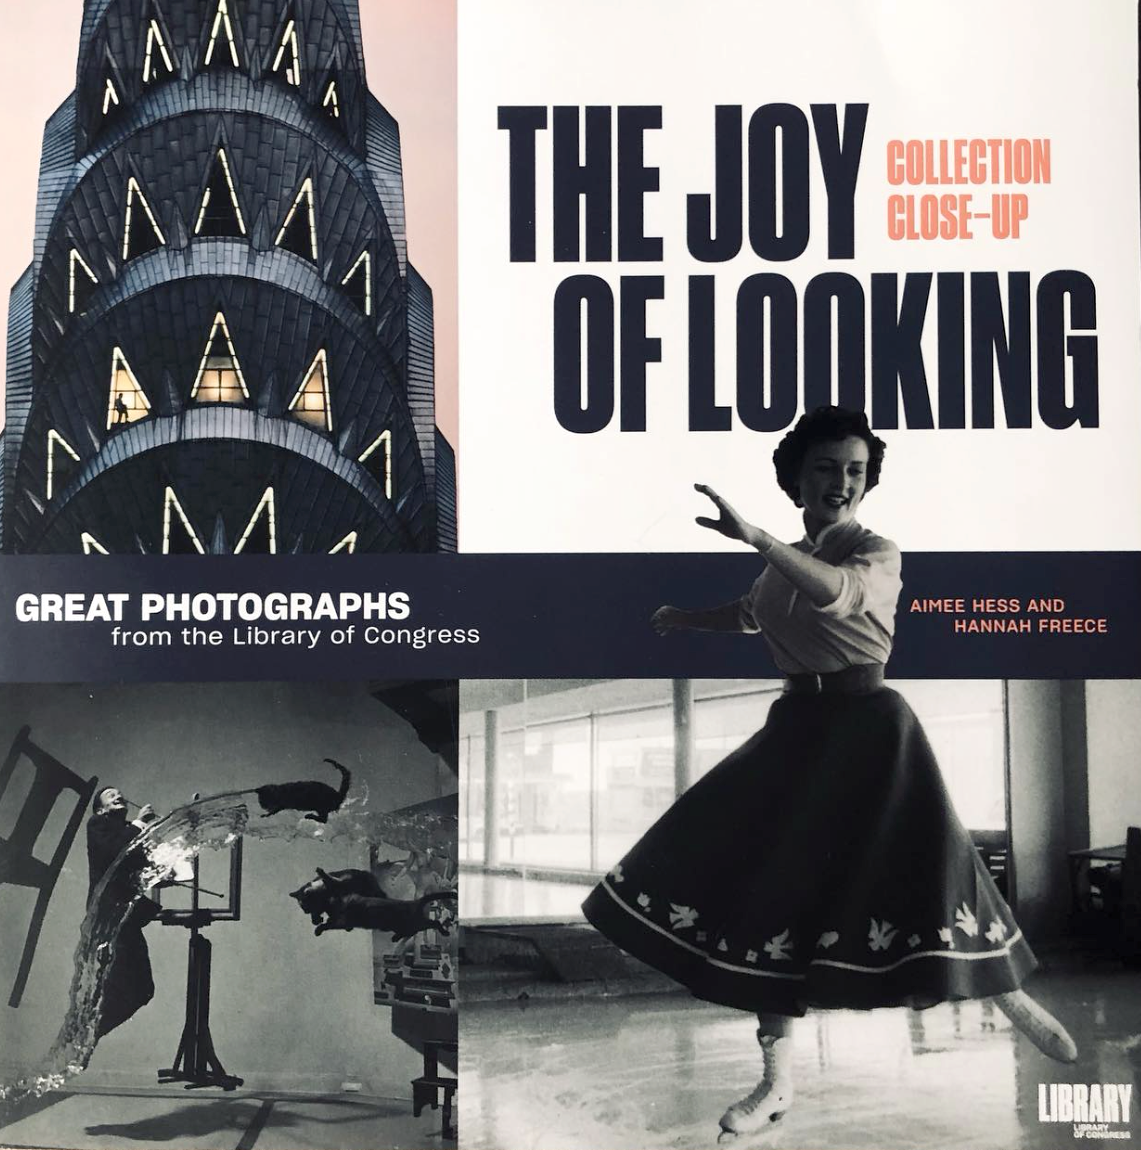 The Joy of looking: Collection close up book by the Library of Congress